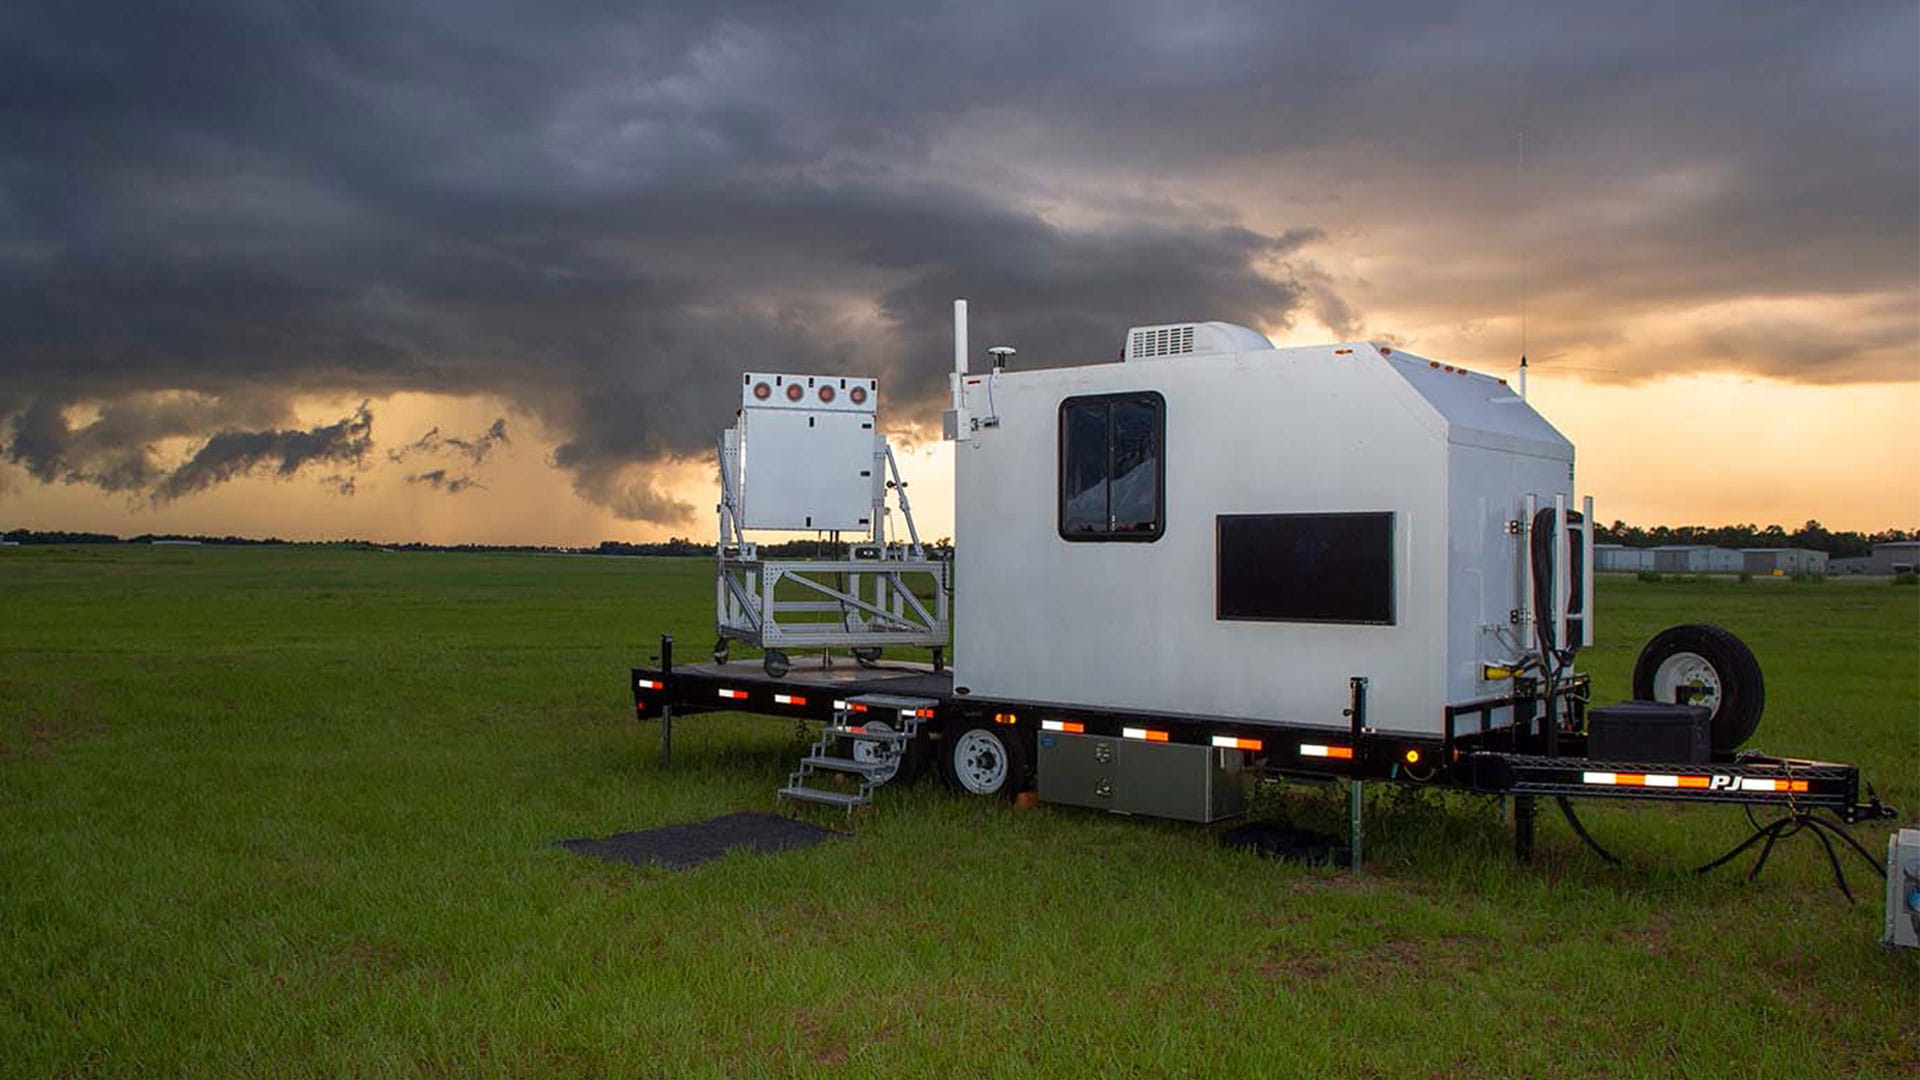 a trailer with a radar unit surveiling the airspace